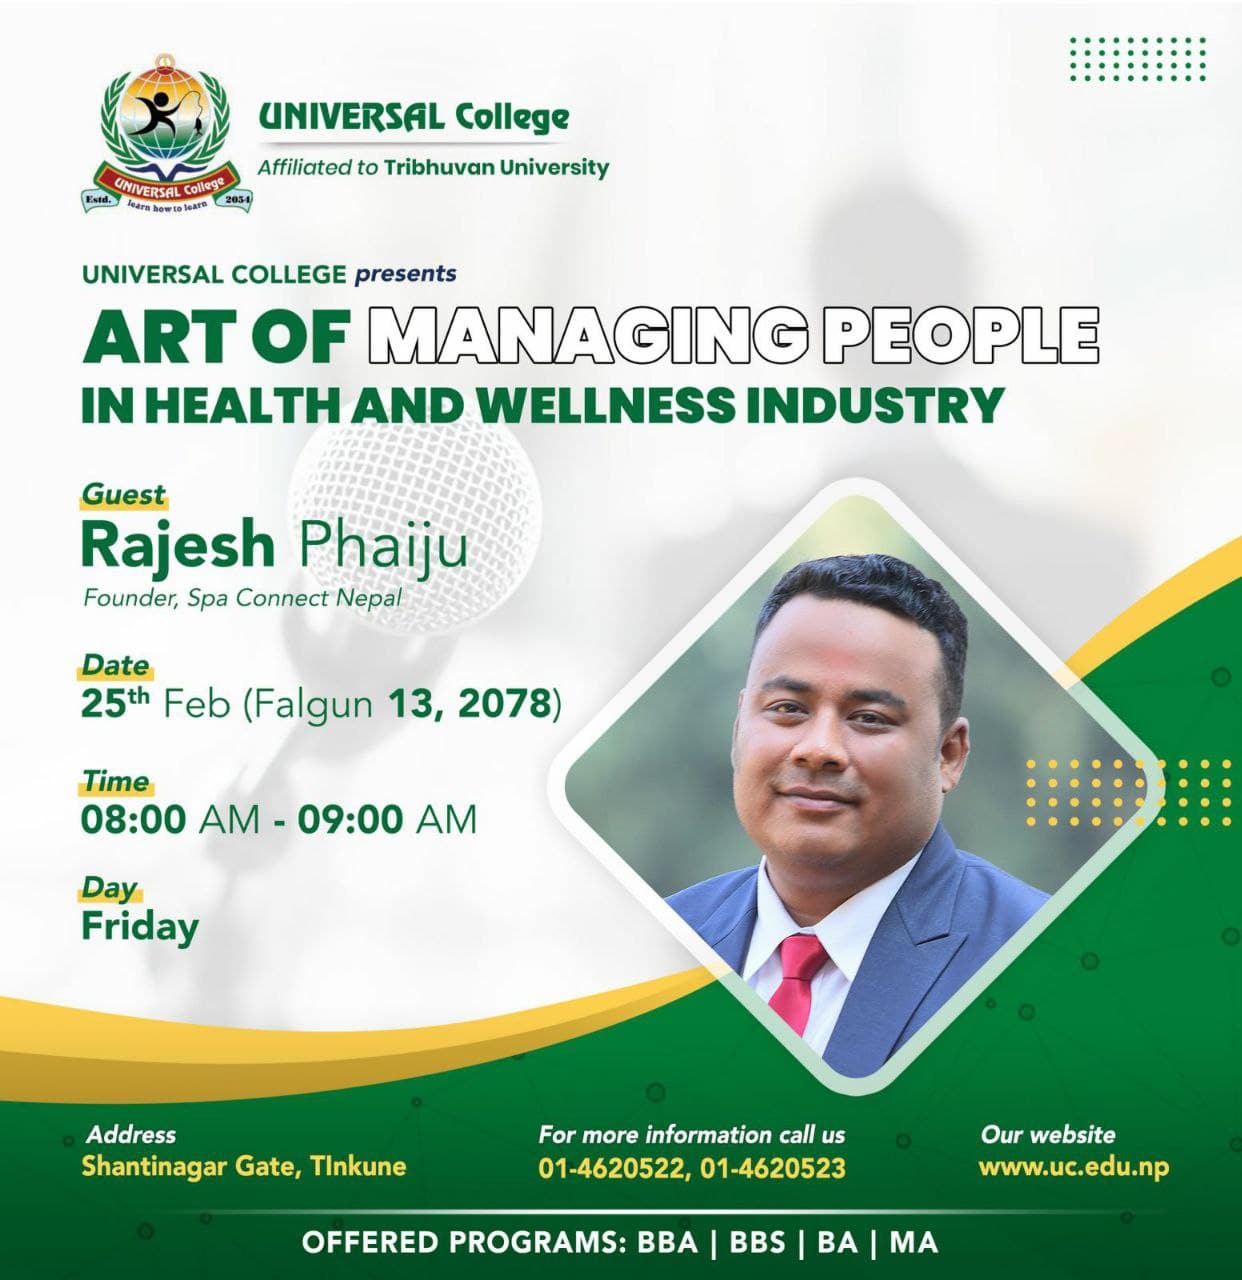 Arts of Managing People in Health and Wellness industry